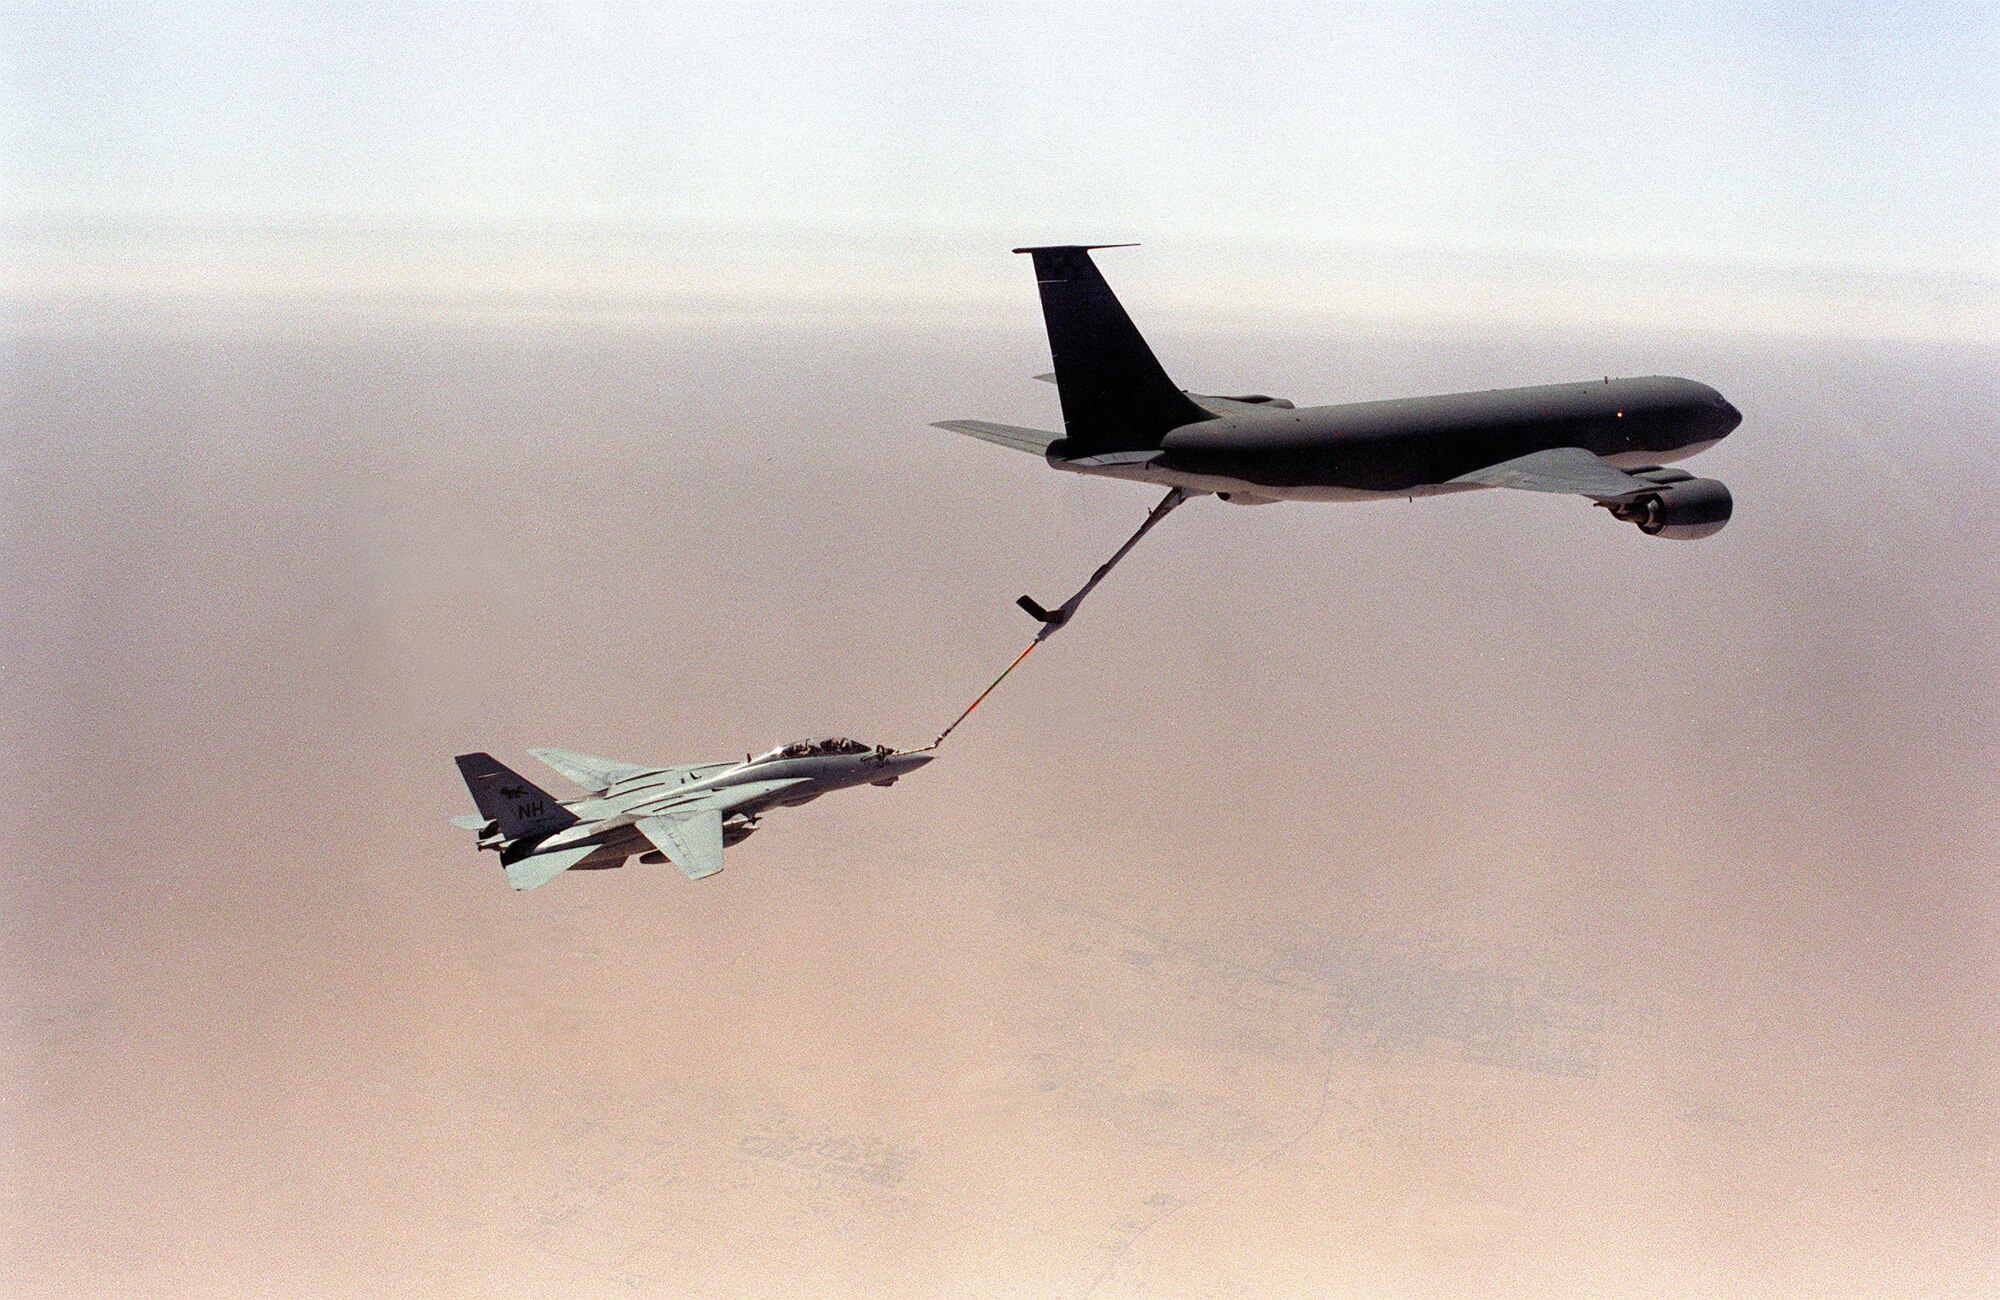 A KC-135 Stratotanker refuels a U.S. Navy fighter during air operations for Operation Desert Storm in January 1991. (Department of Defense Photo)

